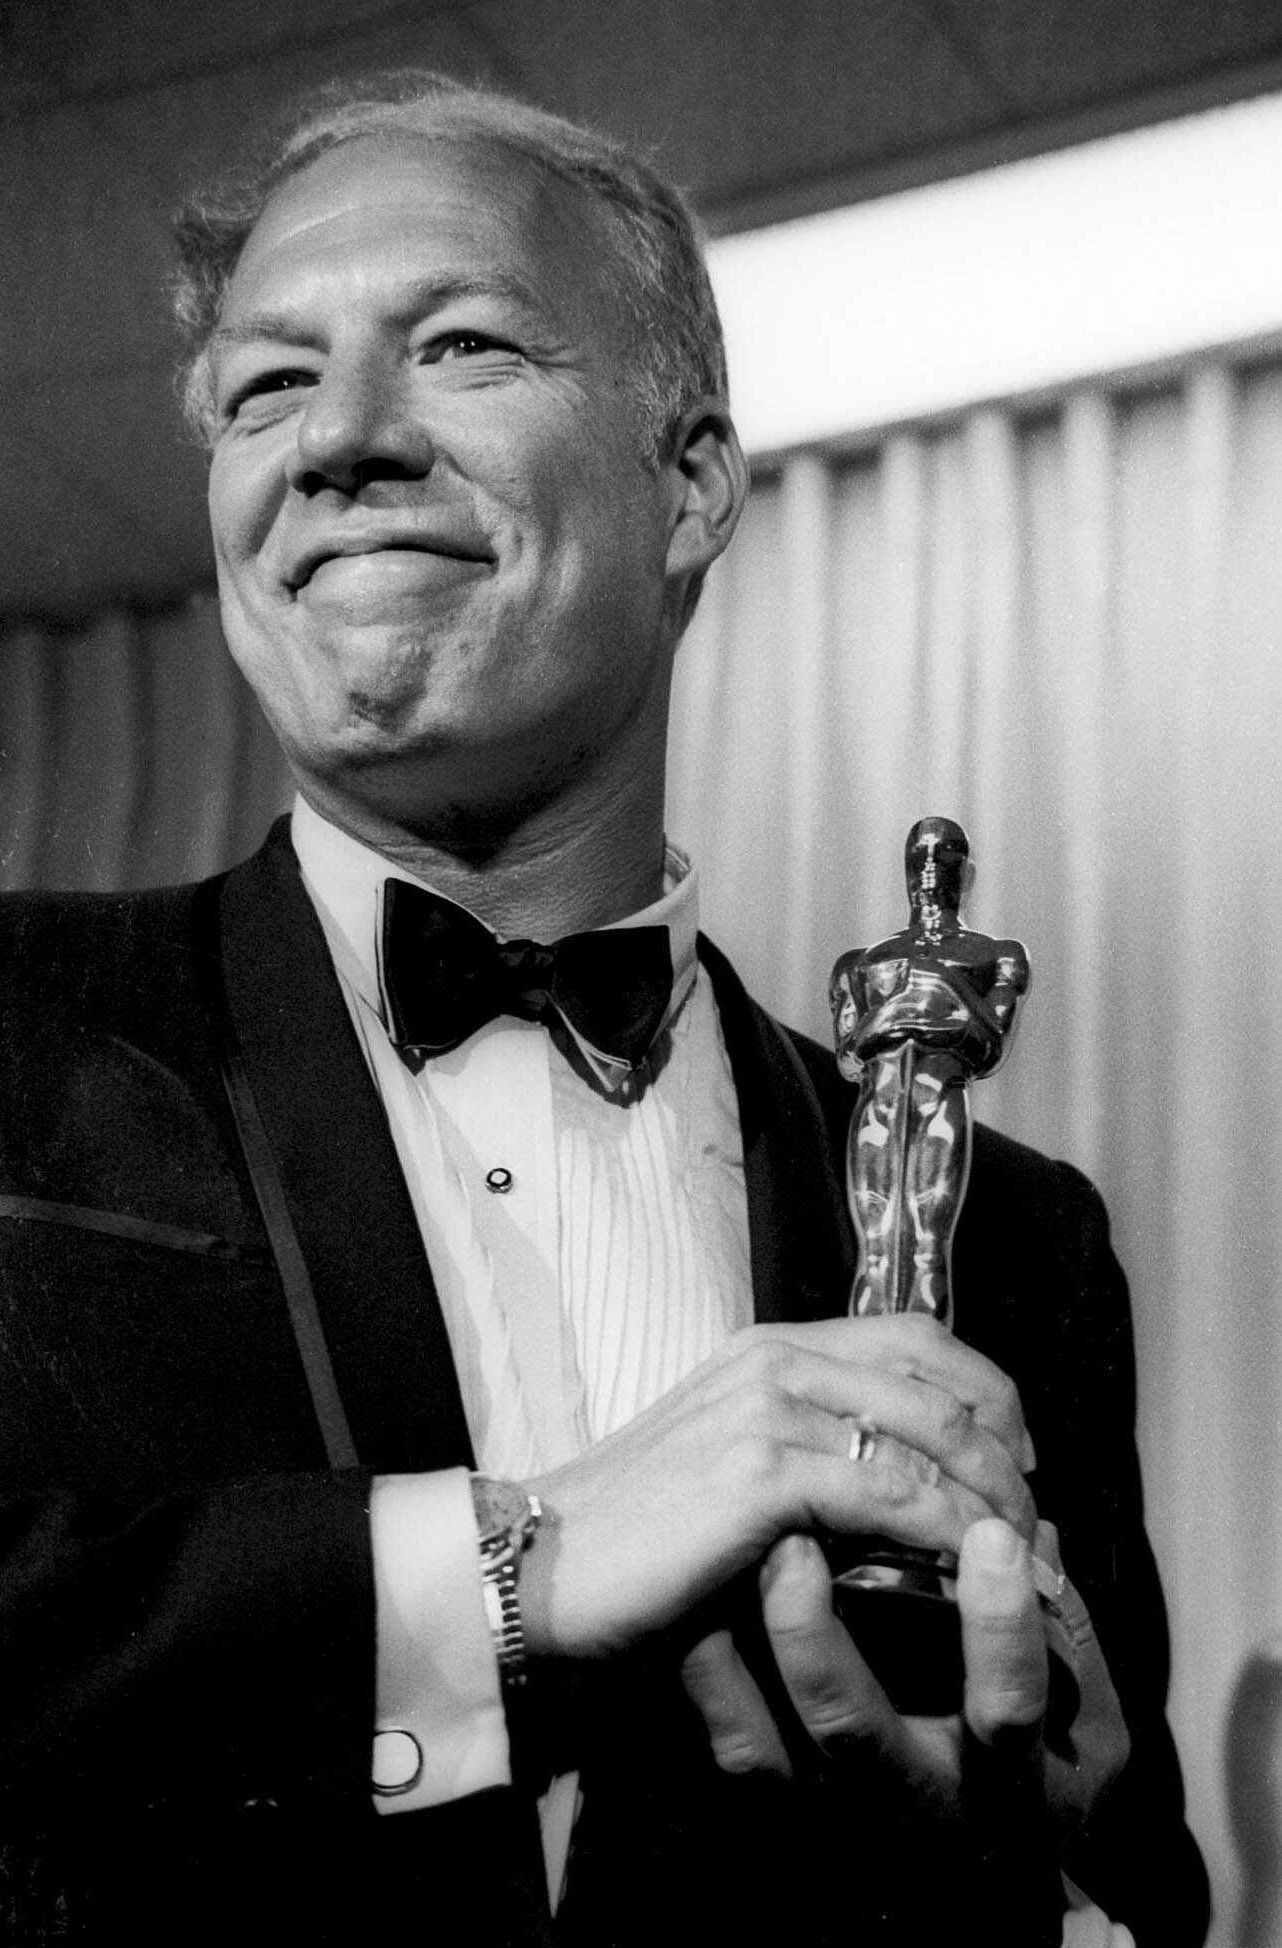 In this April 10, 1968, photo, George Kennedy poses with his Oscar in Santa Monica, California, after winning best supporting actor for “Cool Hand Luke.” Kennedy died Sunday of natural causes in Boise, Idaho, where he moved with his late wife in 2002. He was 91.